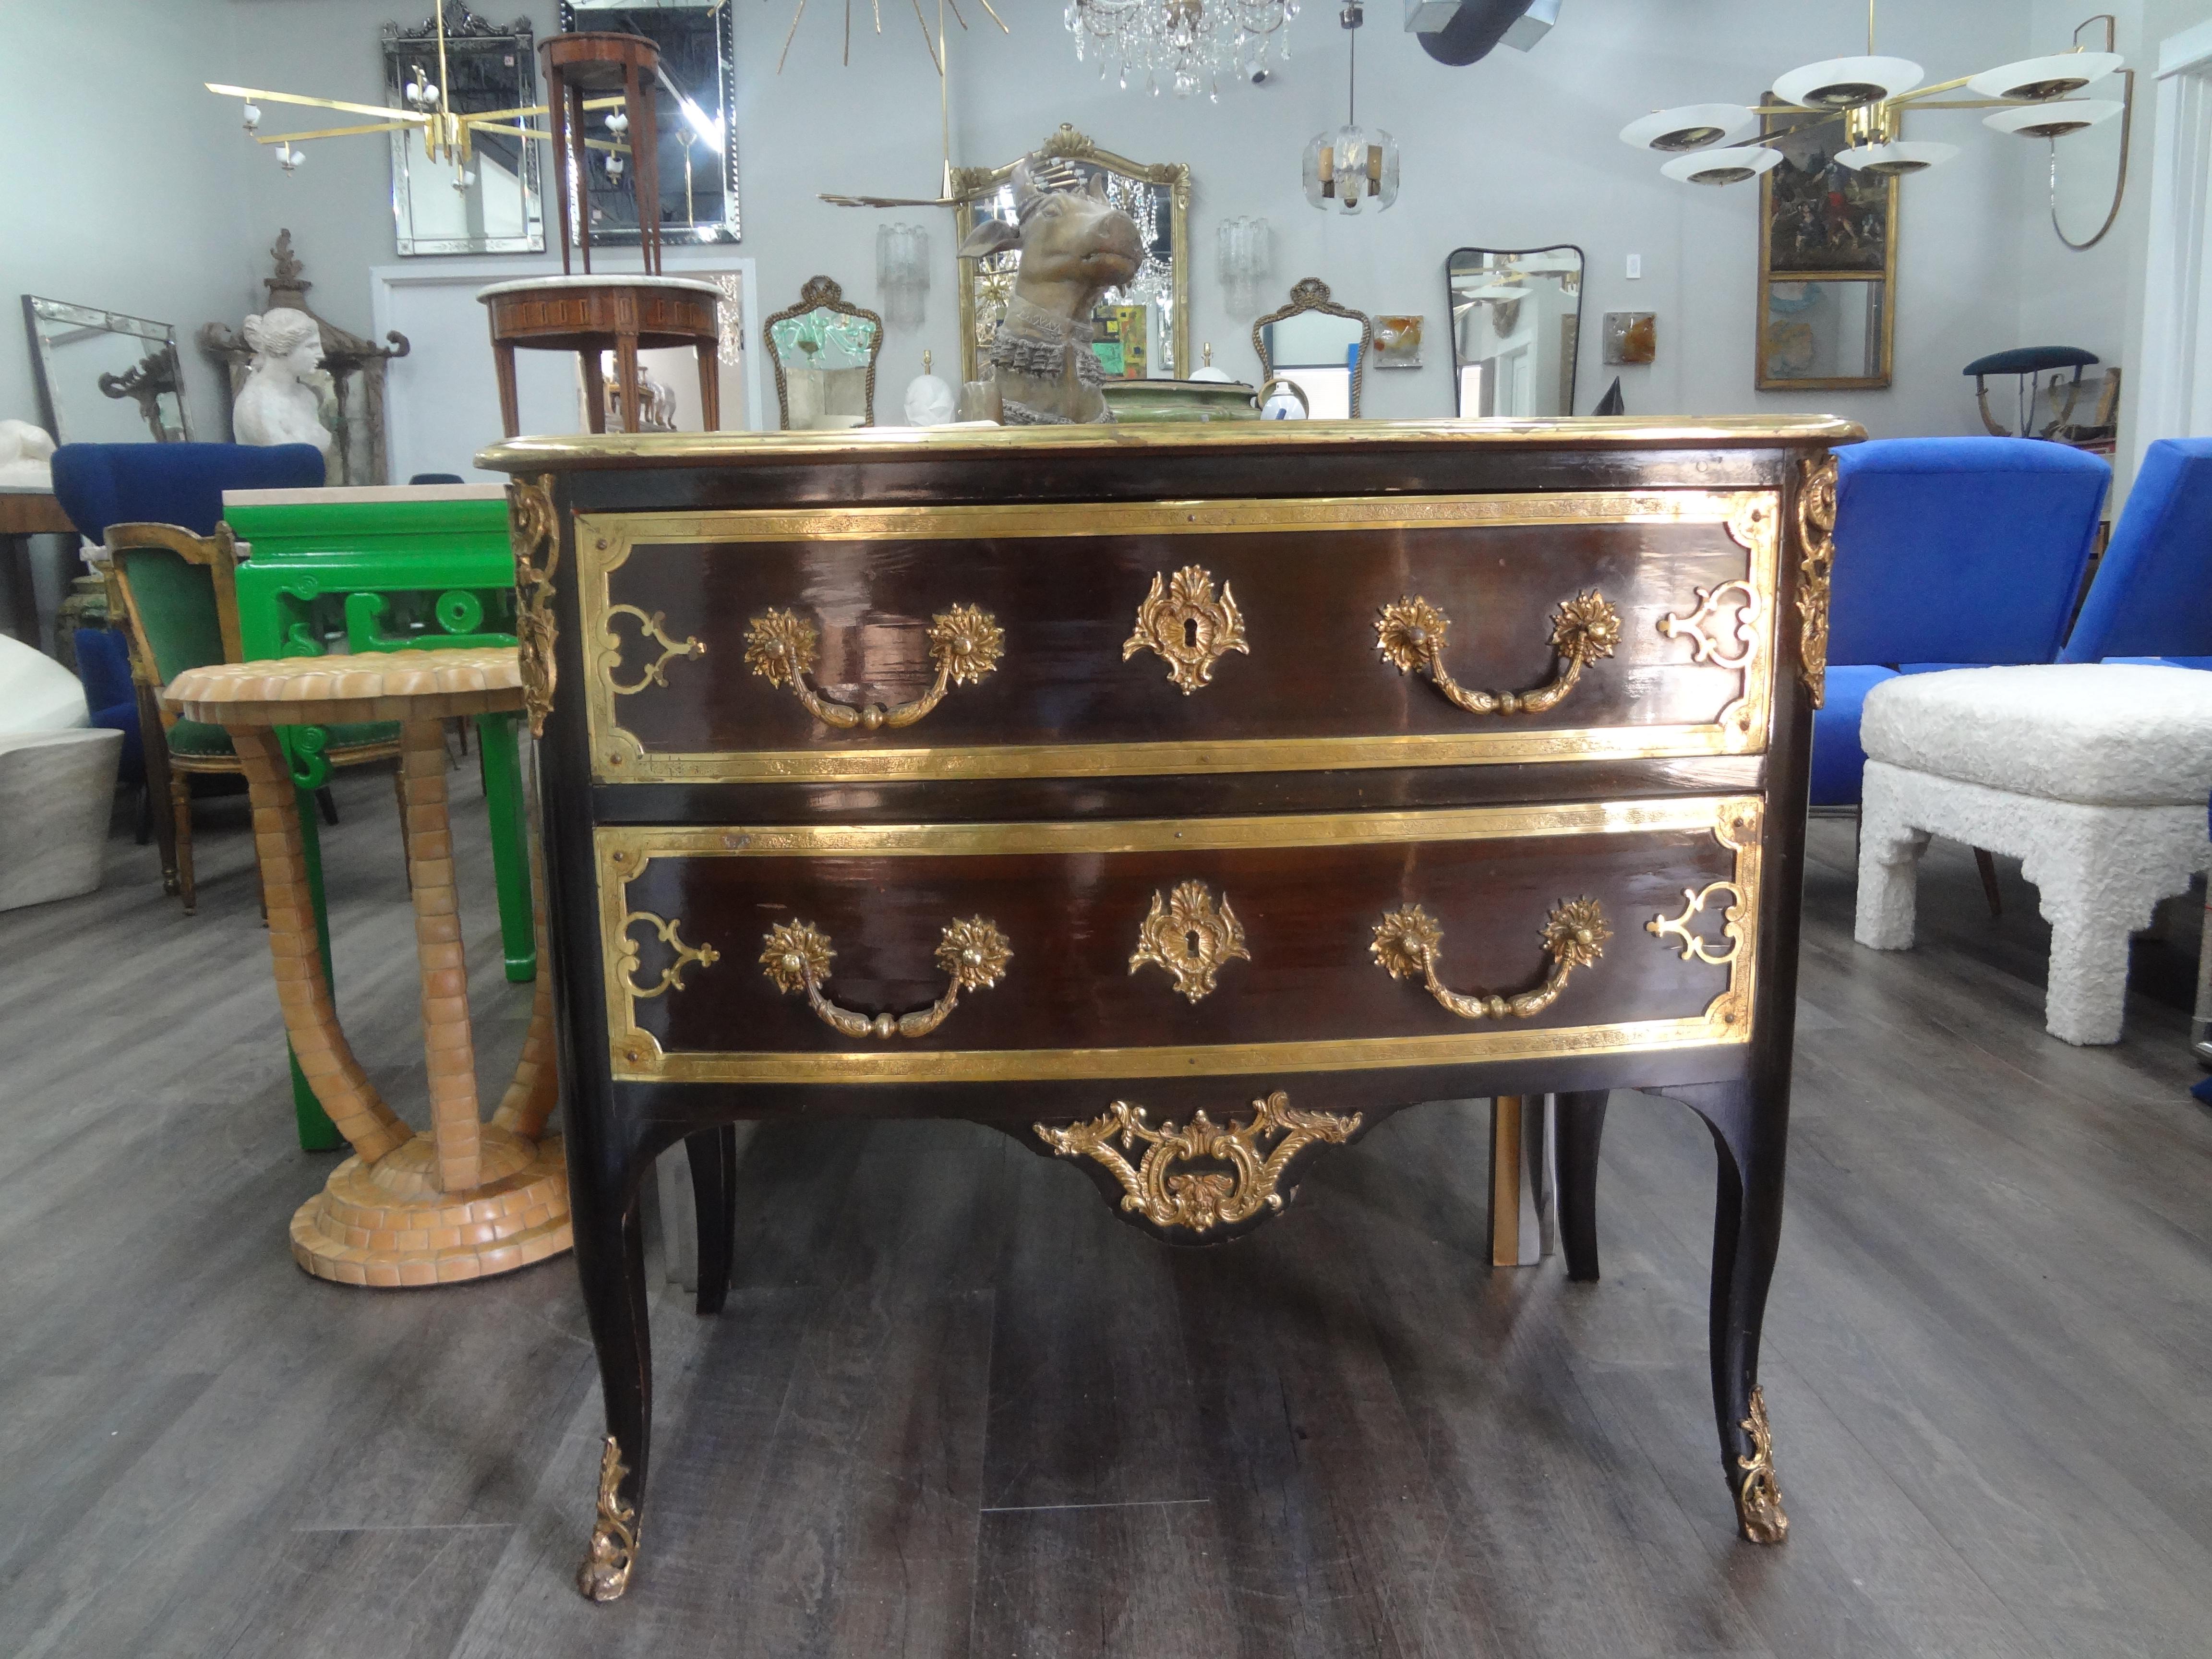  19th Century French Louis XV Style Commode or Chest.
This stunning French Louis XV style ebonized two drawer chest has beautiful gilt bronze hardware and the original locks and key.
Gorgeous!